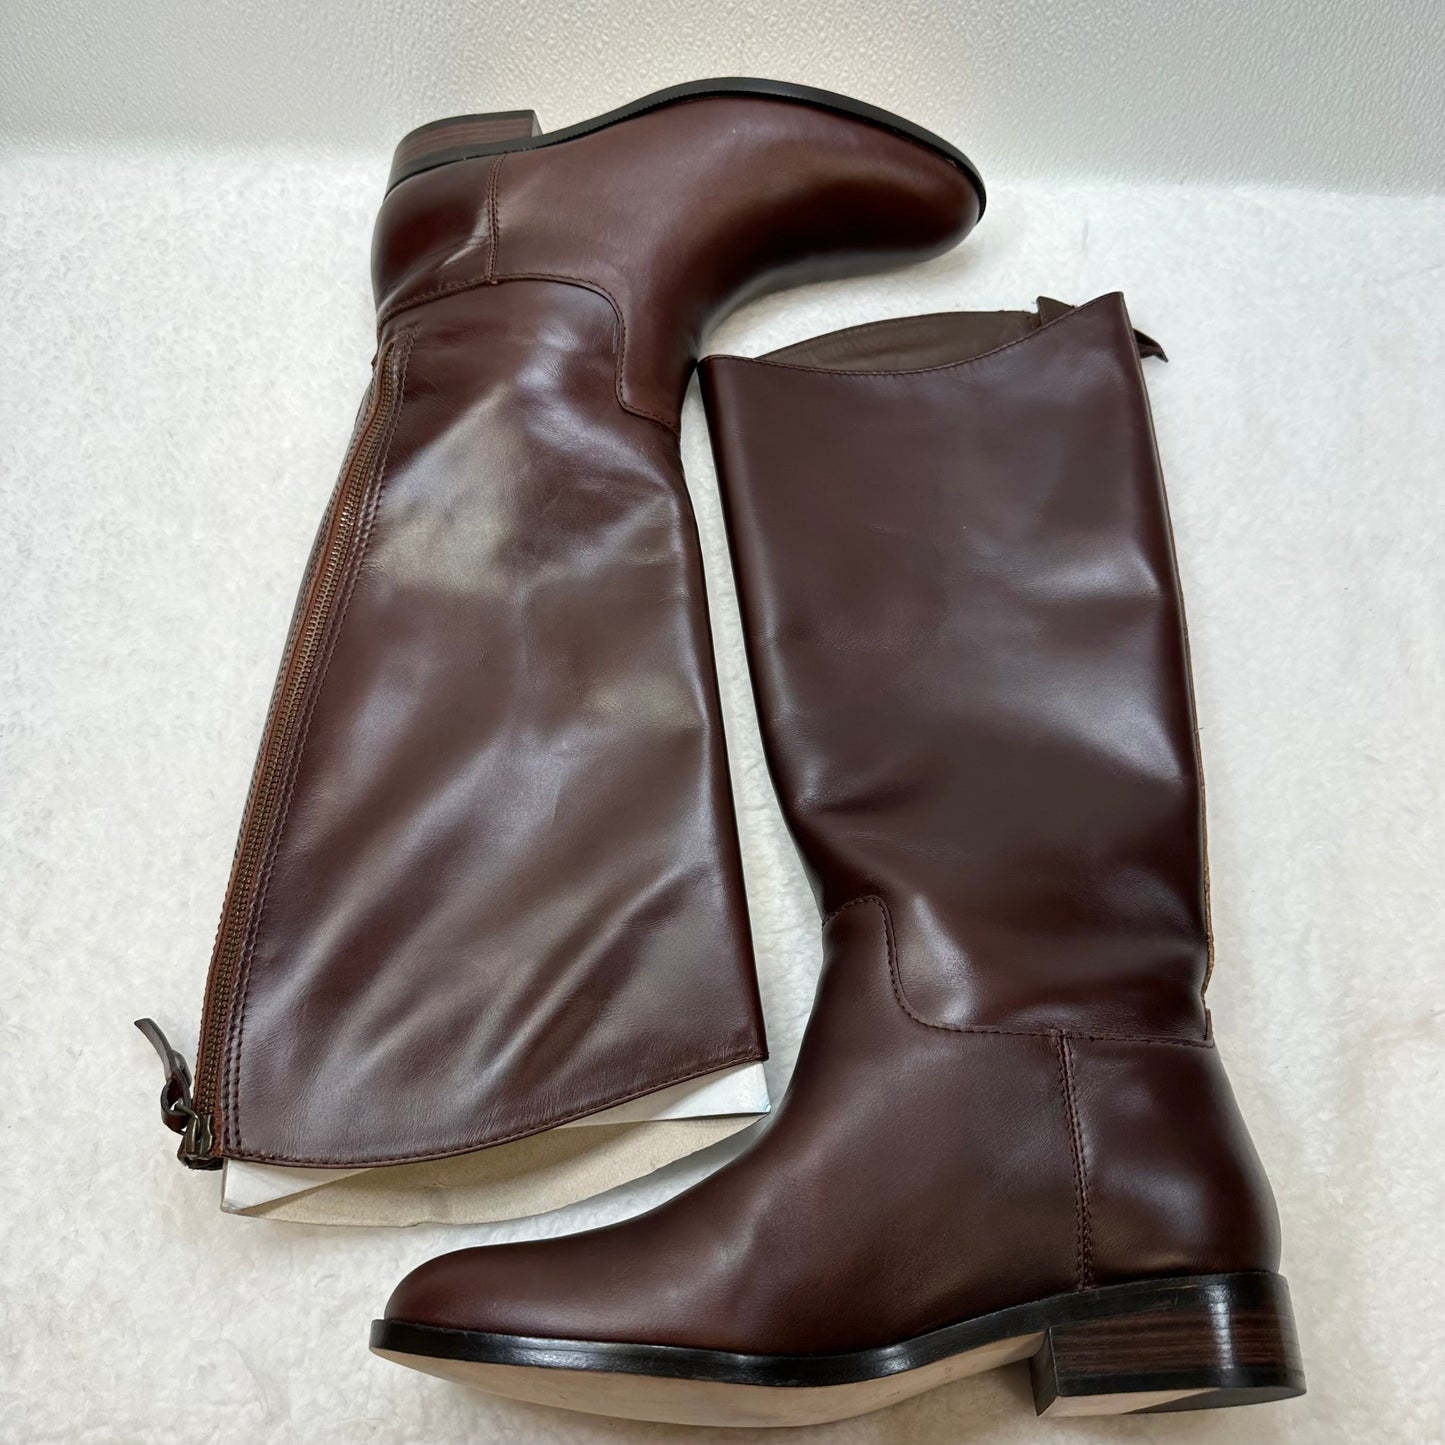 Boots Knee Flats By Cole-haan O  Size: 9